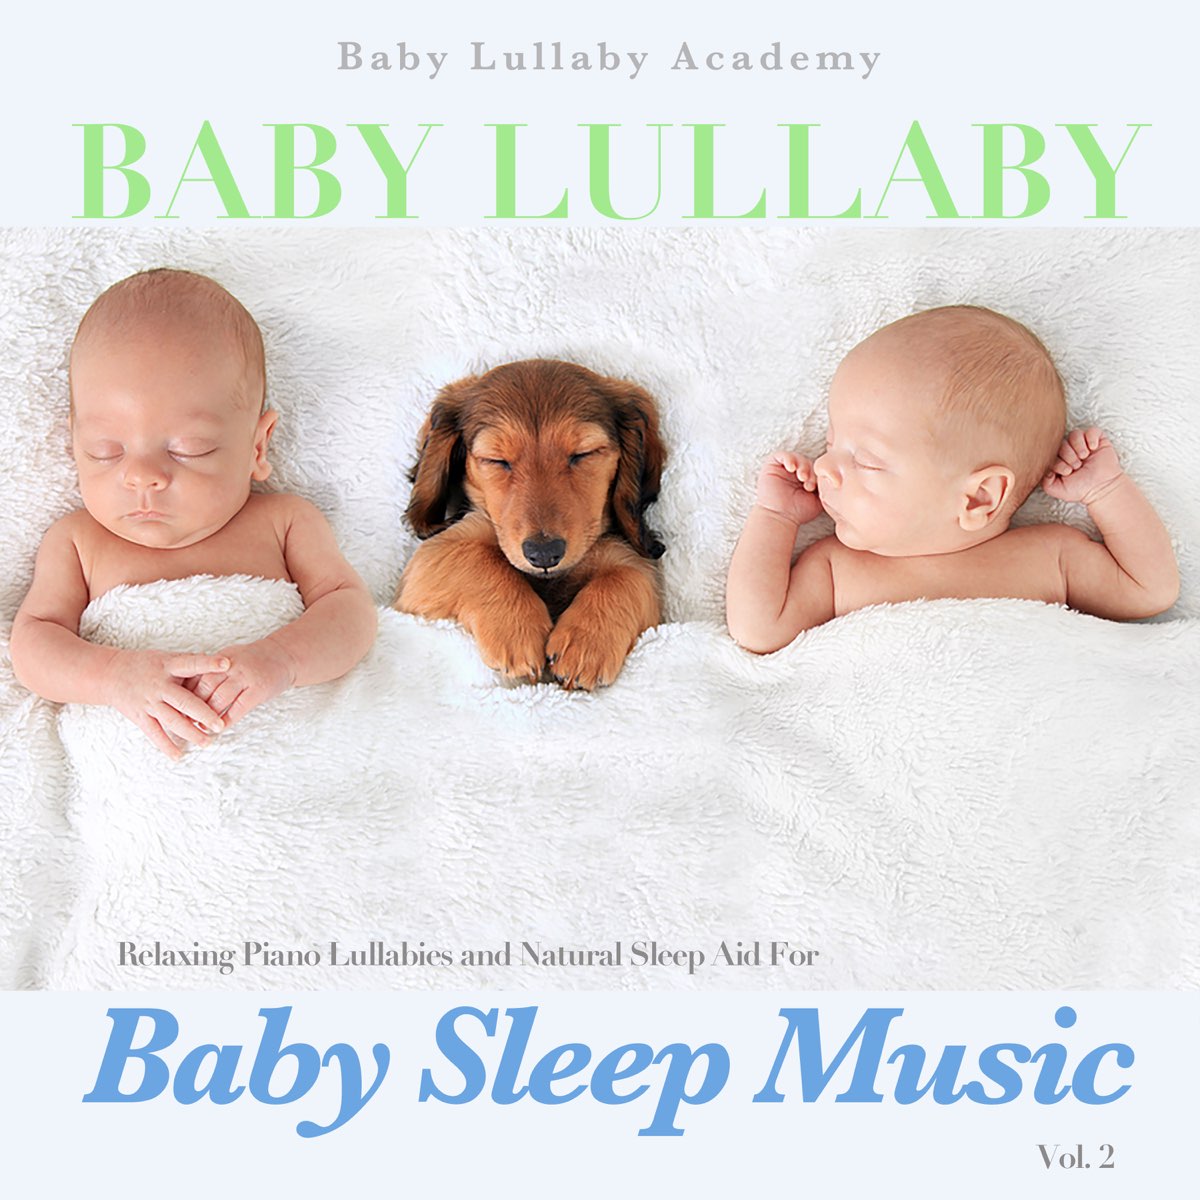 Baby Lullaby: Relaxing Piano Lullabies and Natural Sleep Aid for Baby Sleep  Music, Vol. 2 by Baby Lullaby Academy on Apple Music